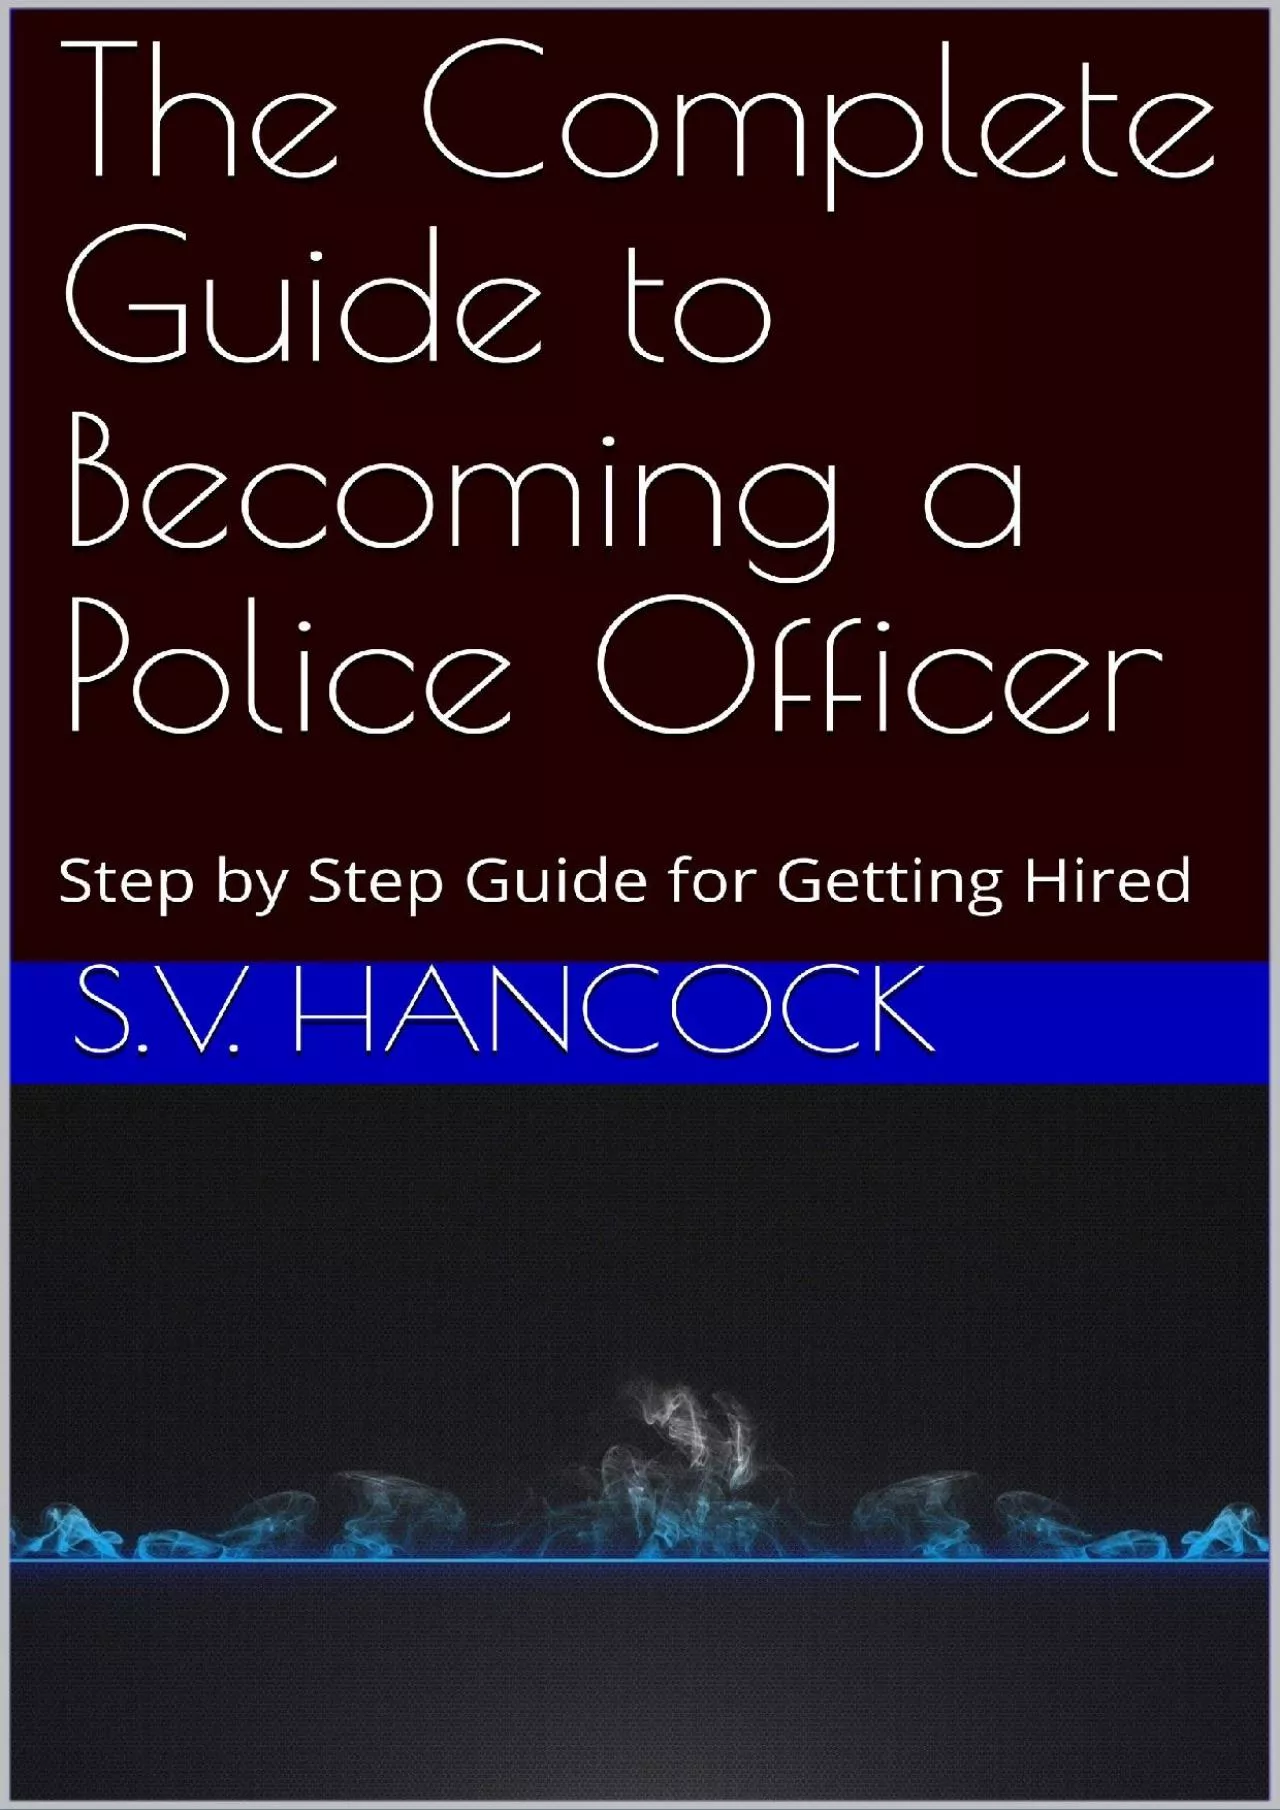 [DOWNLOAD] The Complete Guide to Becoming a Police Officer: Step by Step Guide for Getting